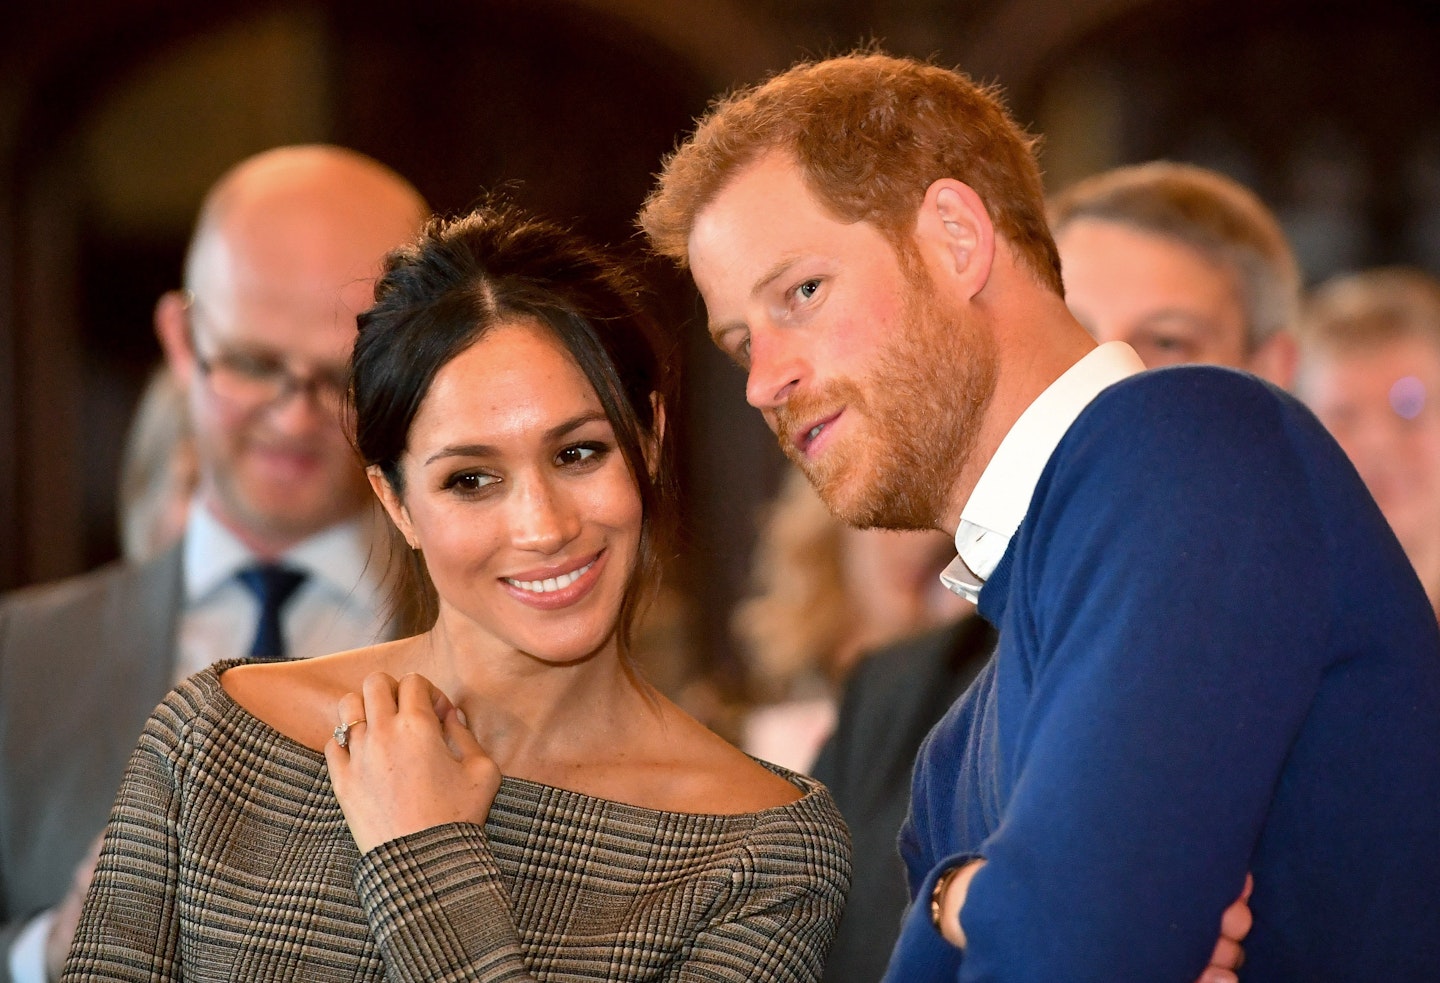 All The Signs We Missed That Harry And Meghan Were Planning To Quit Royal Life 